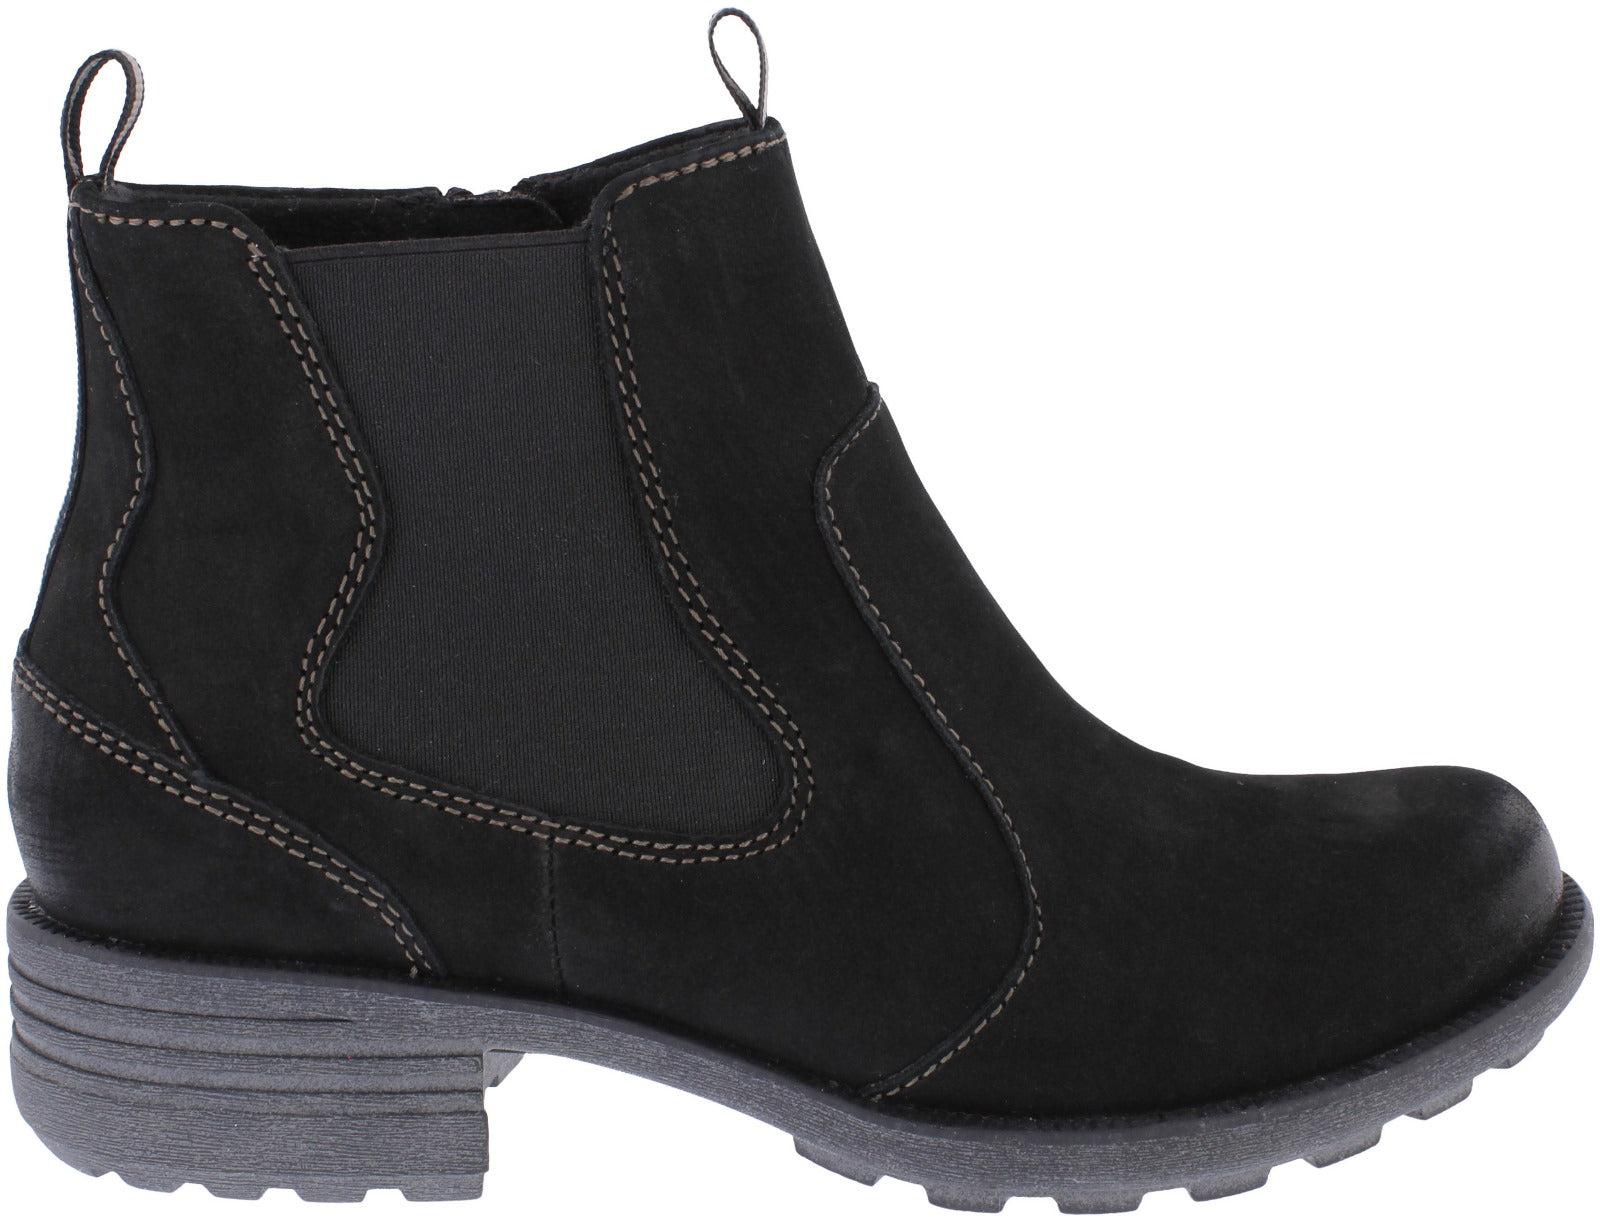 Free Spirit 40814 Ascot Ladies Black Leather Arch Support Side Zip Ankle Boots